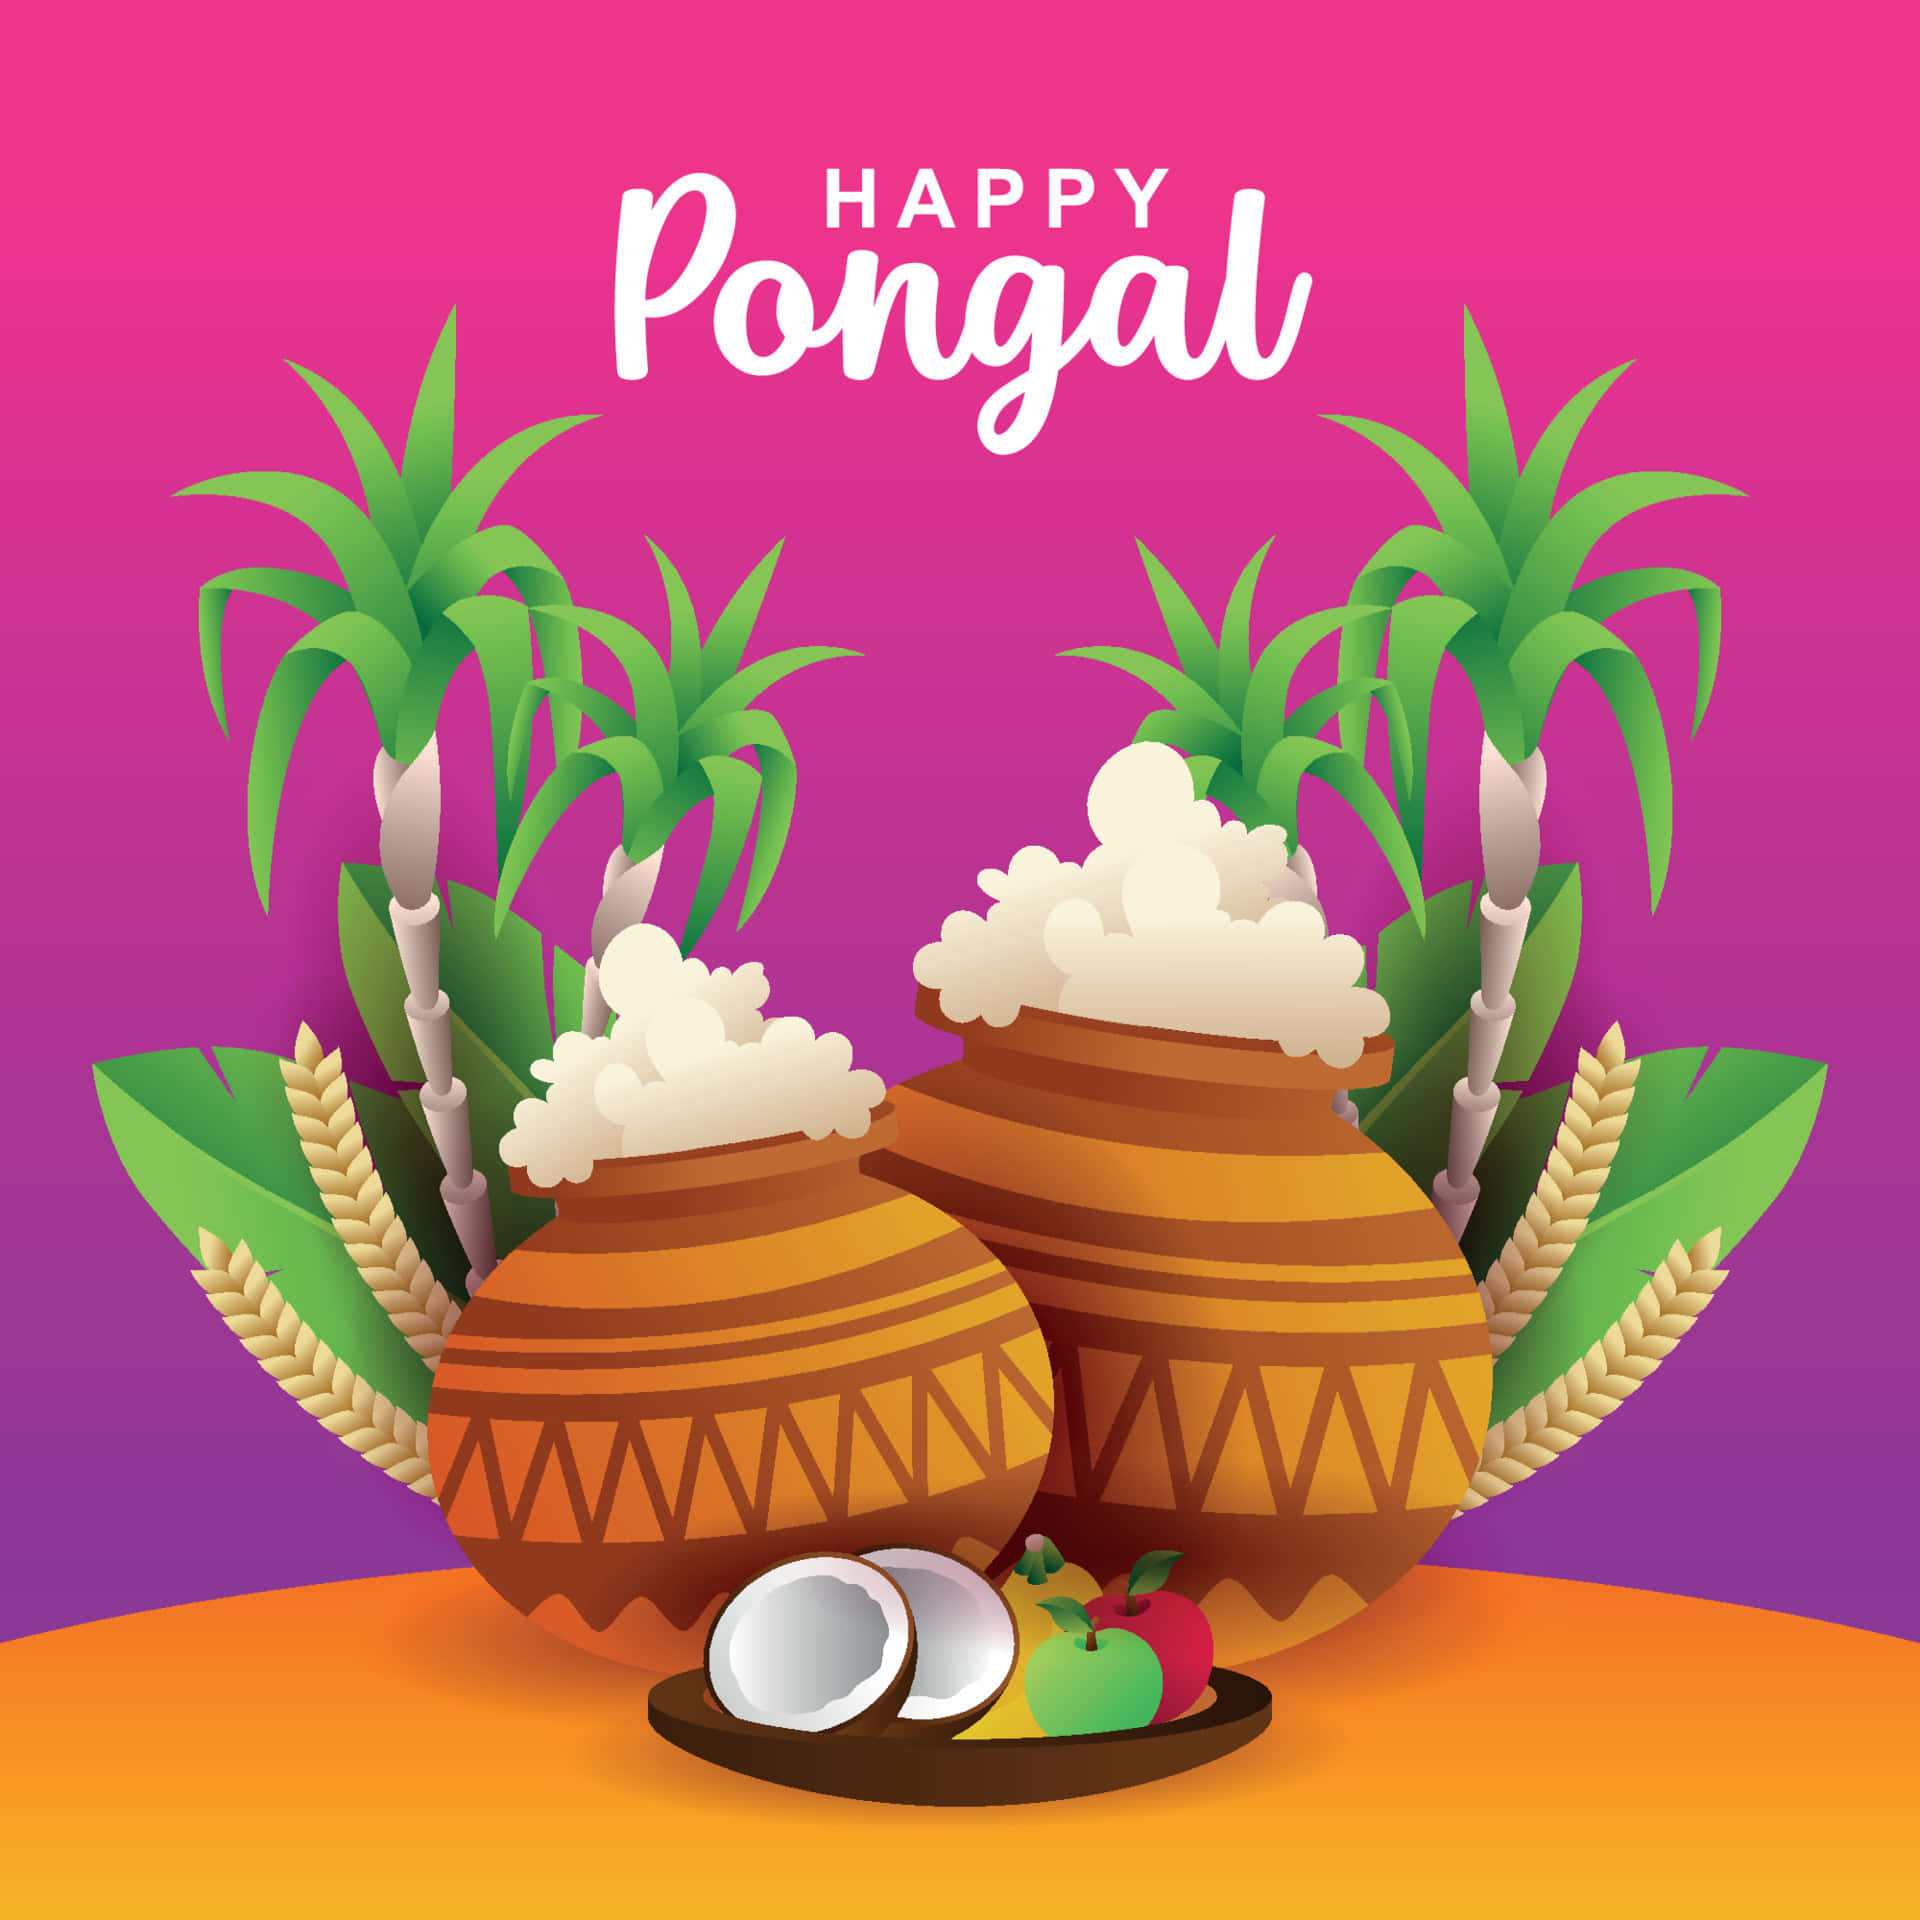 Traditional Pongal Festival celebration with earthen pot and offerings